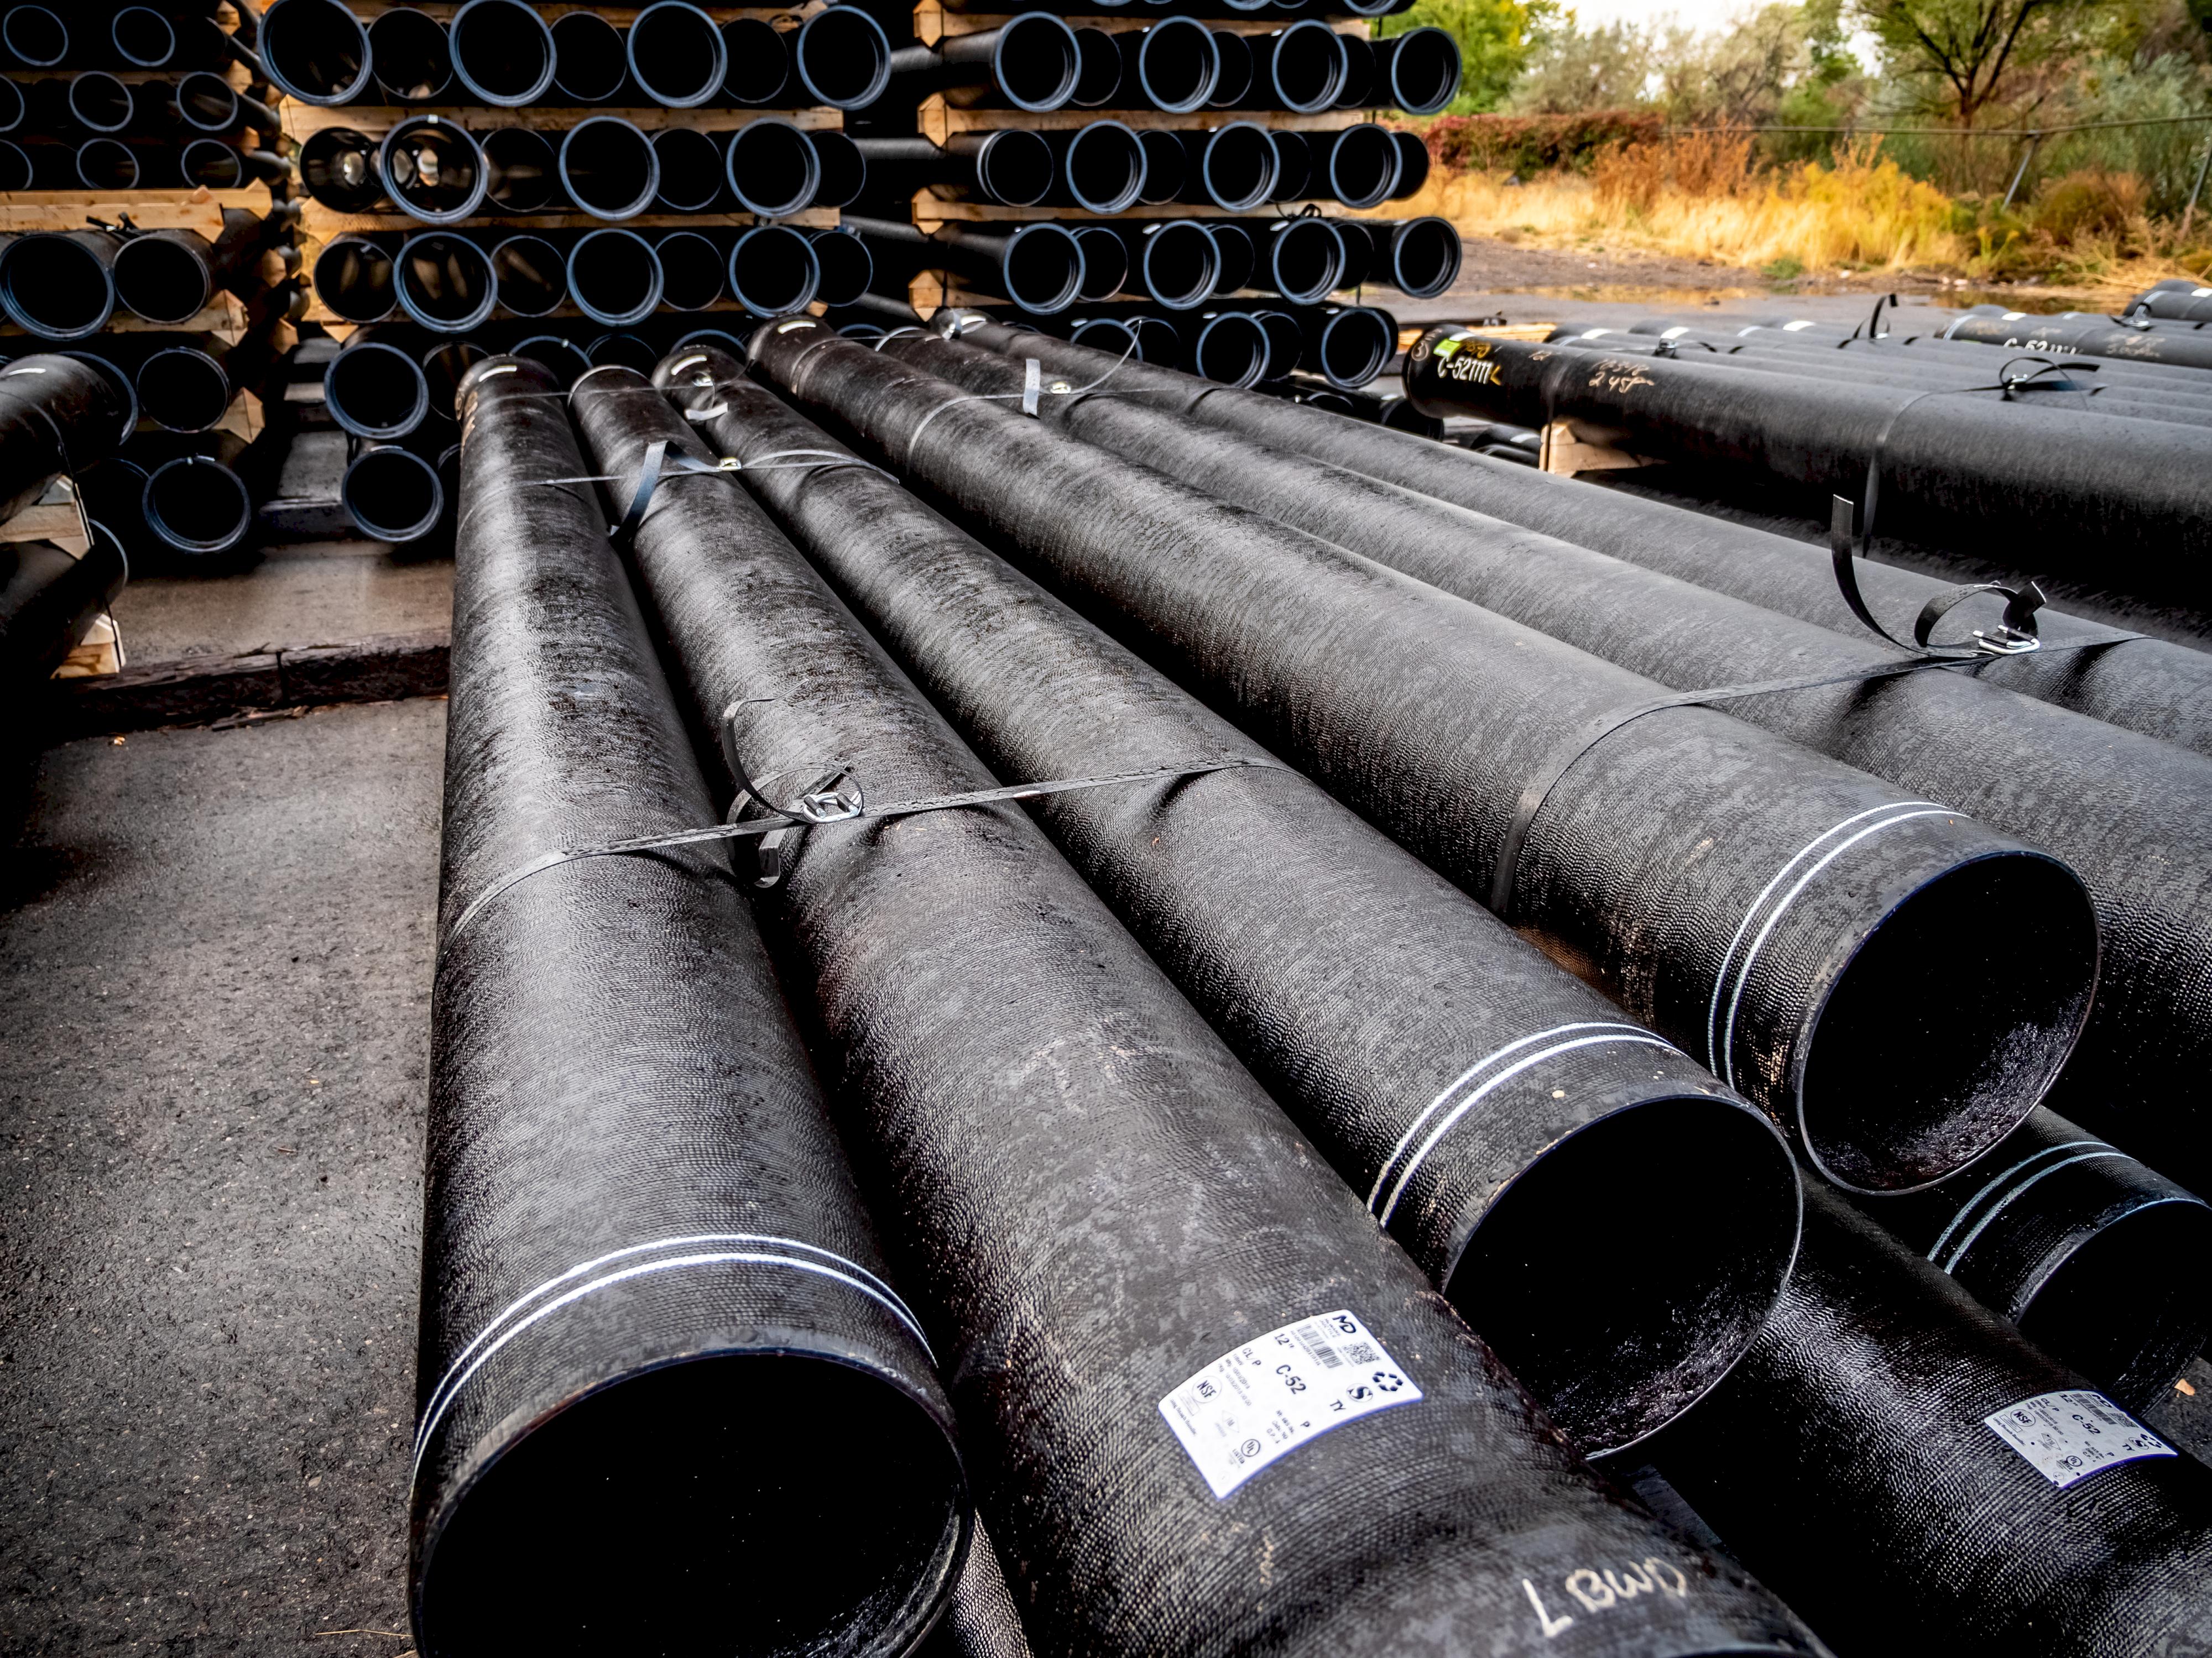 Why Use Ductile Iron Pipe? An Interview With Bill Dunnill, GM